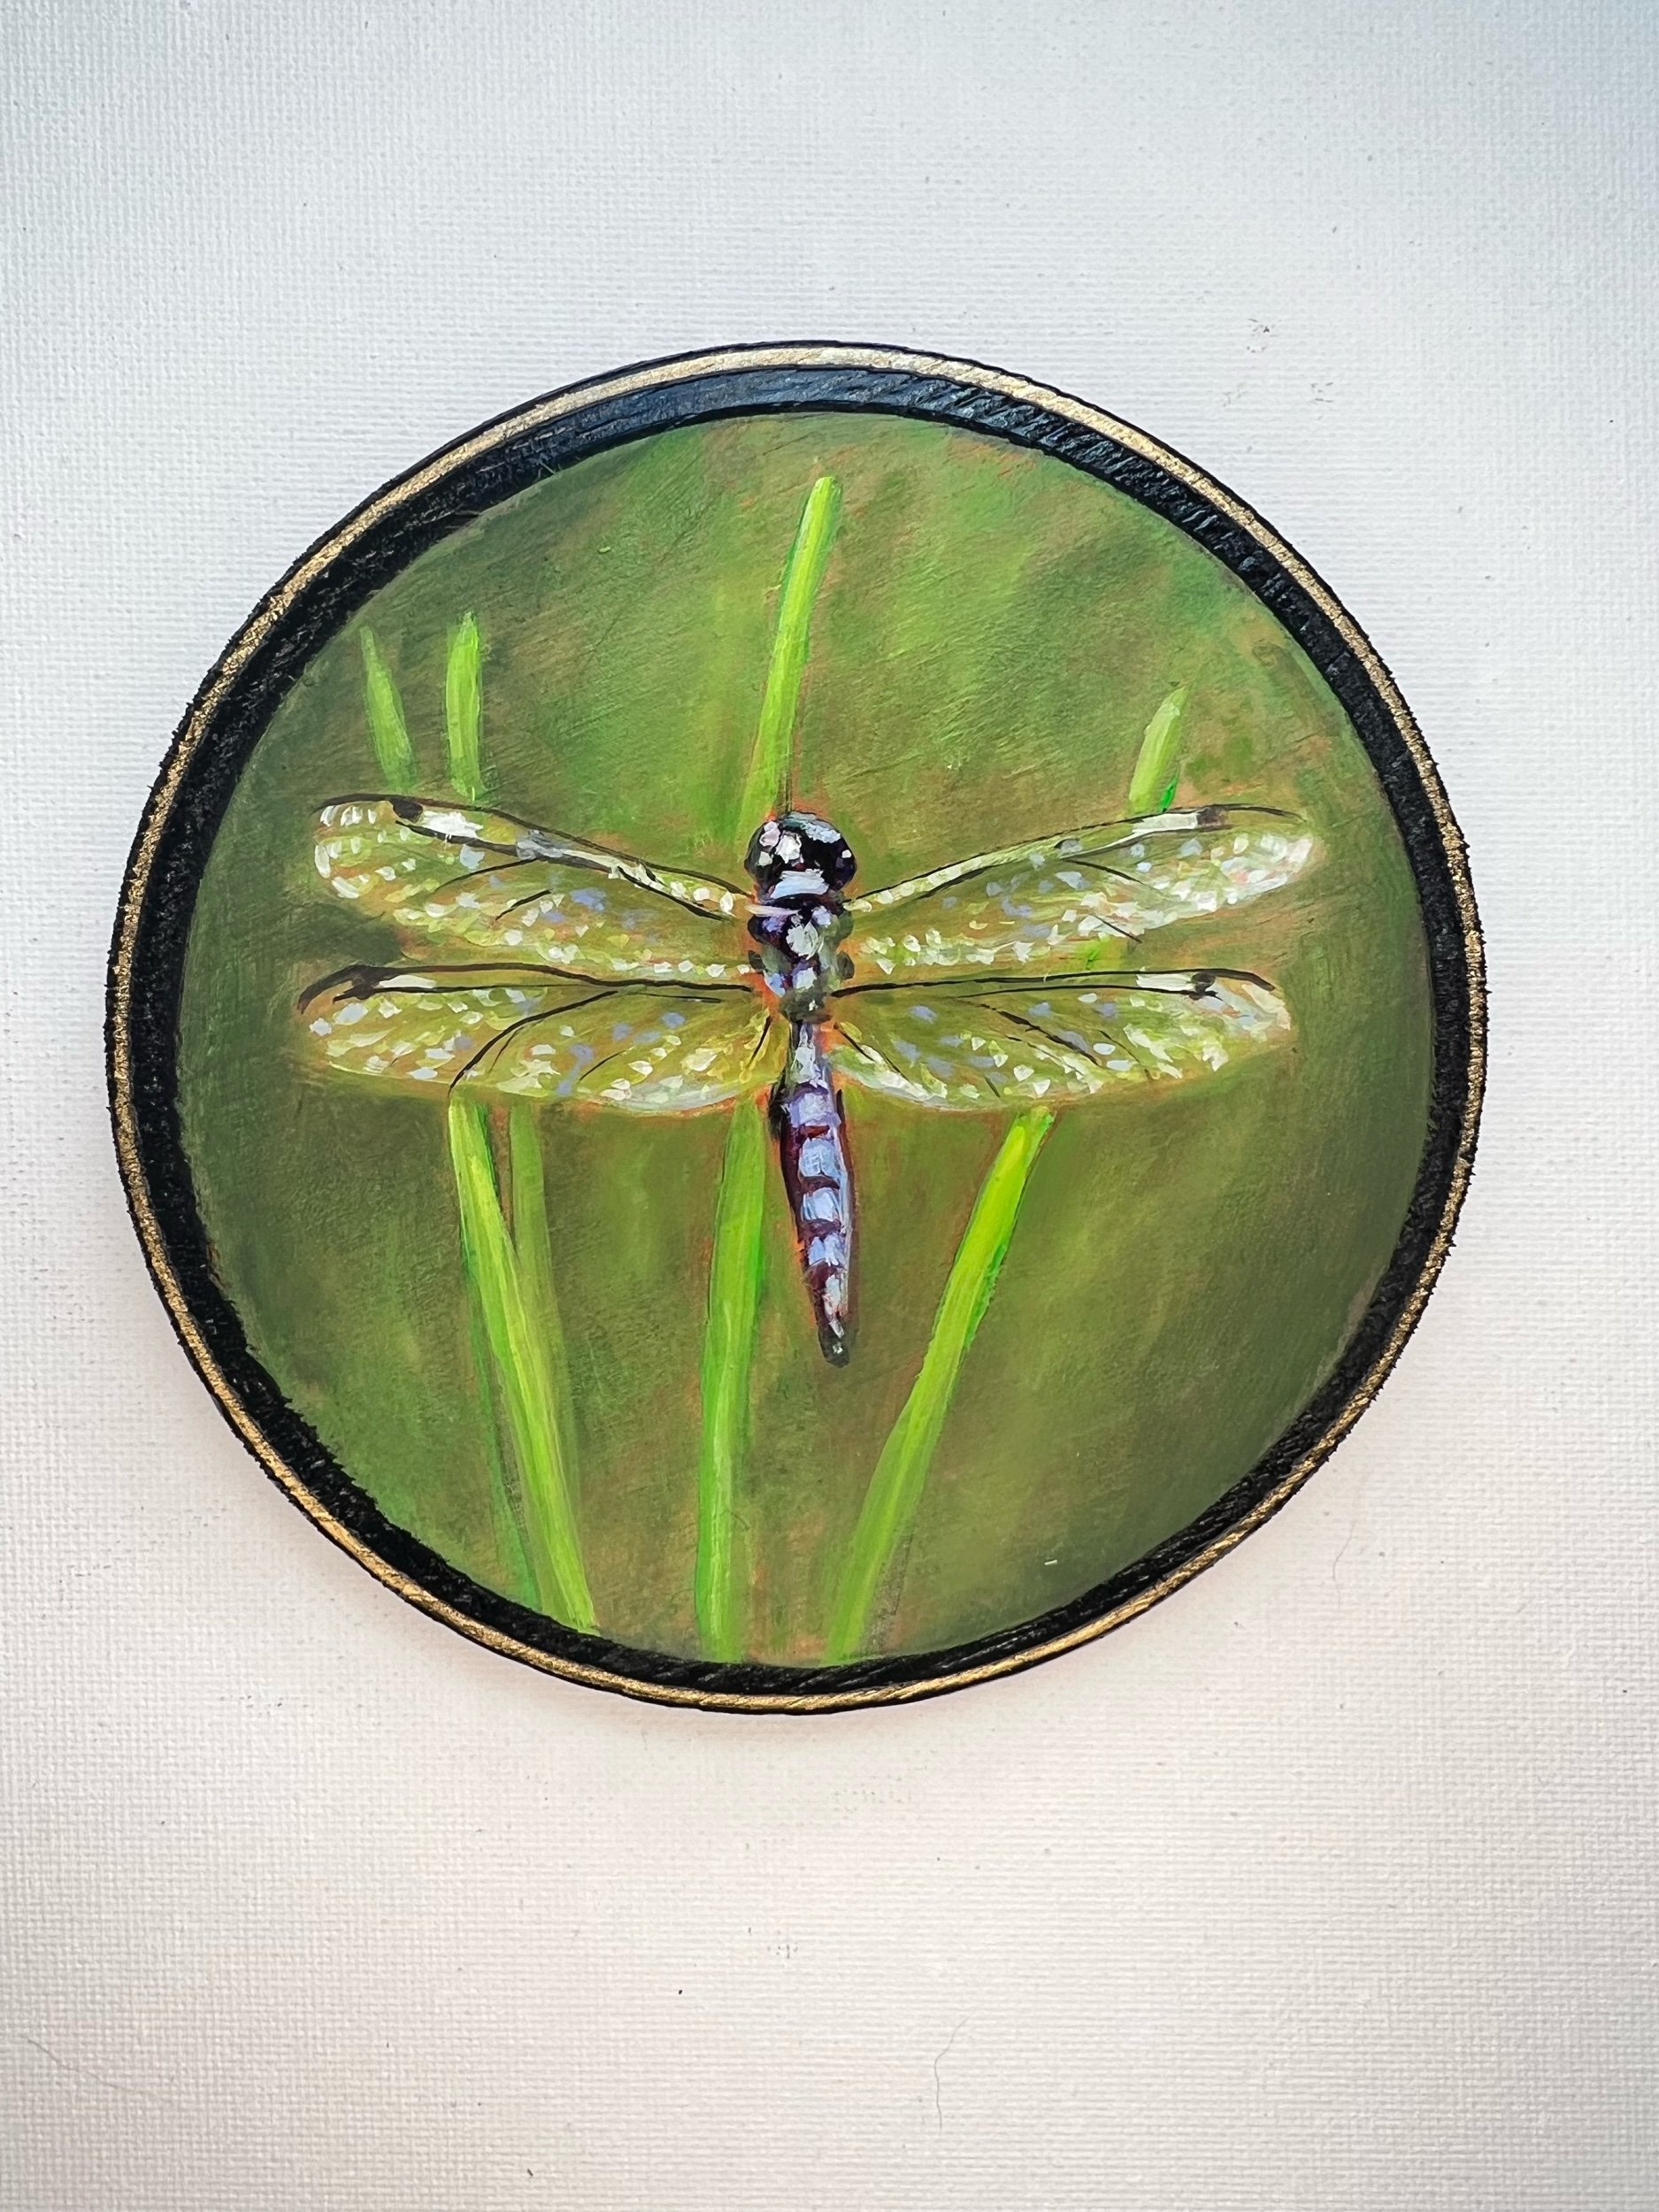 Dragonfly 5x5” SOLD